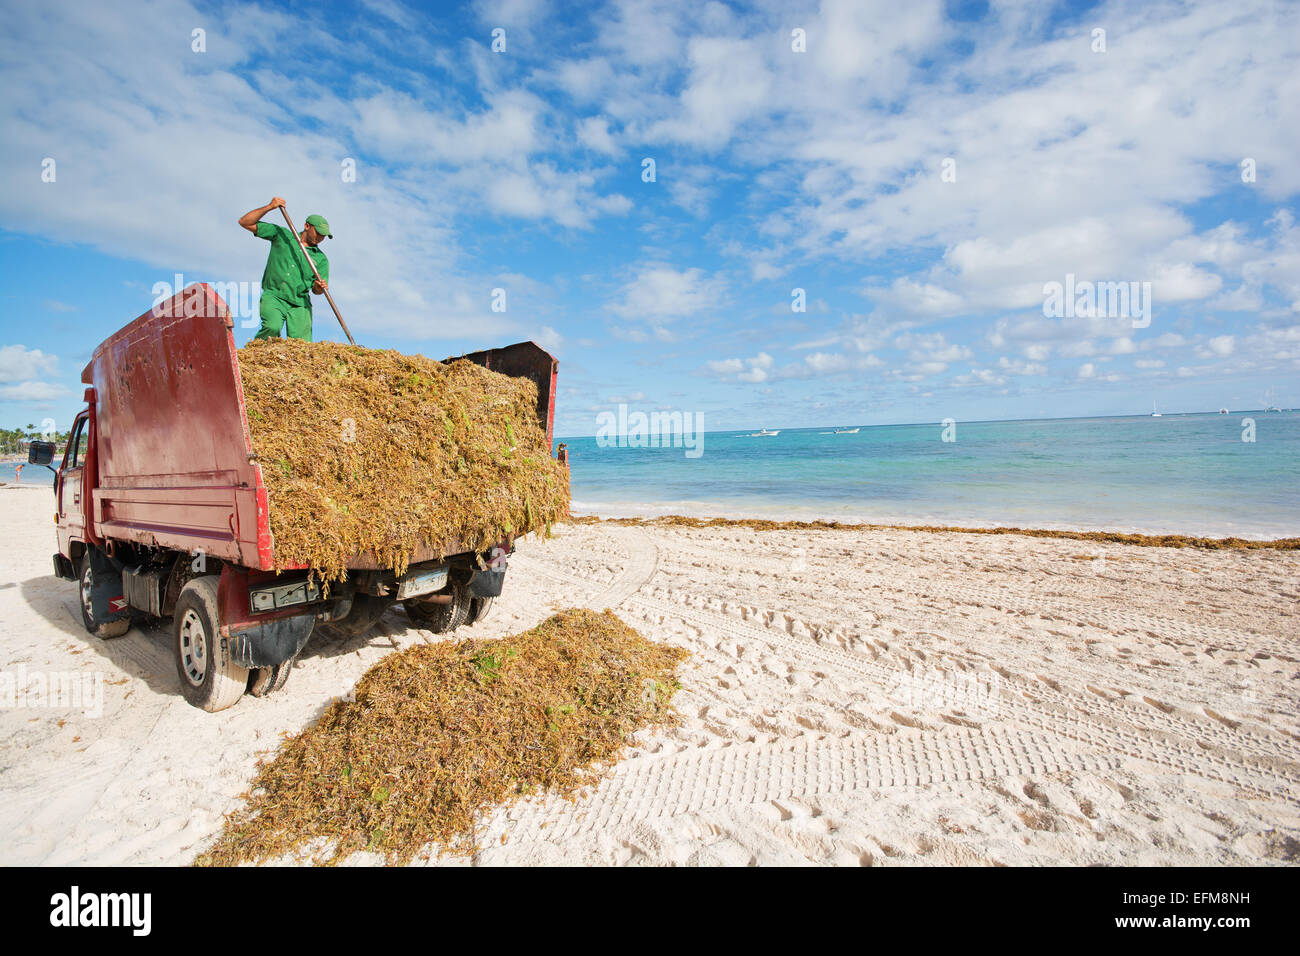 DOMINICAN REPUBLIC. Clearing unsightly Sargassum seaweed from Punta Cana beach on the Atlantic coast. 2015. Stock Photo